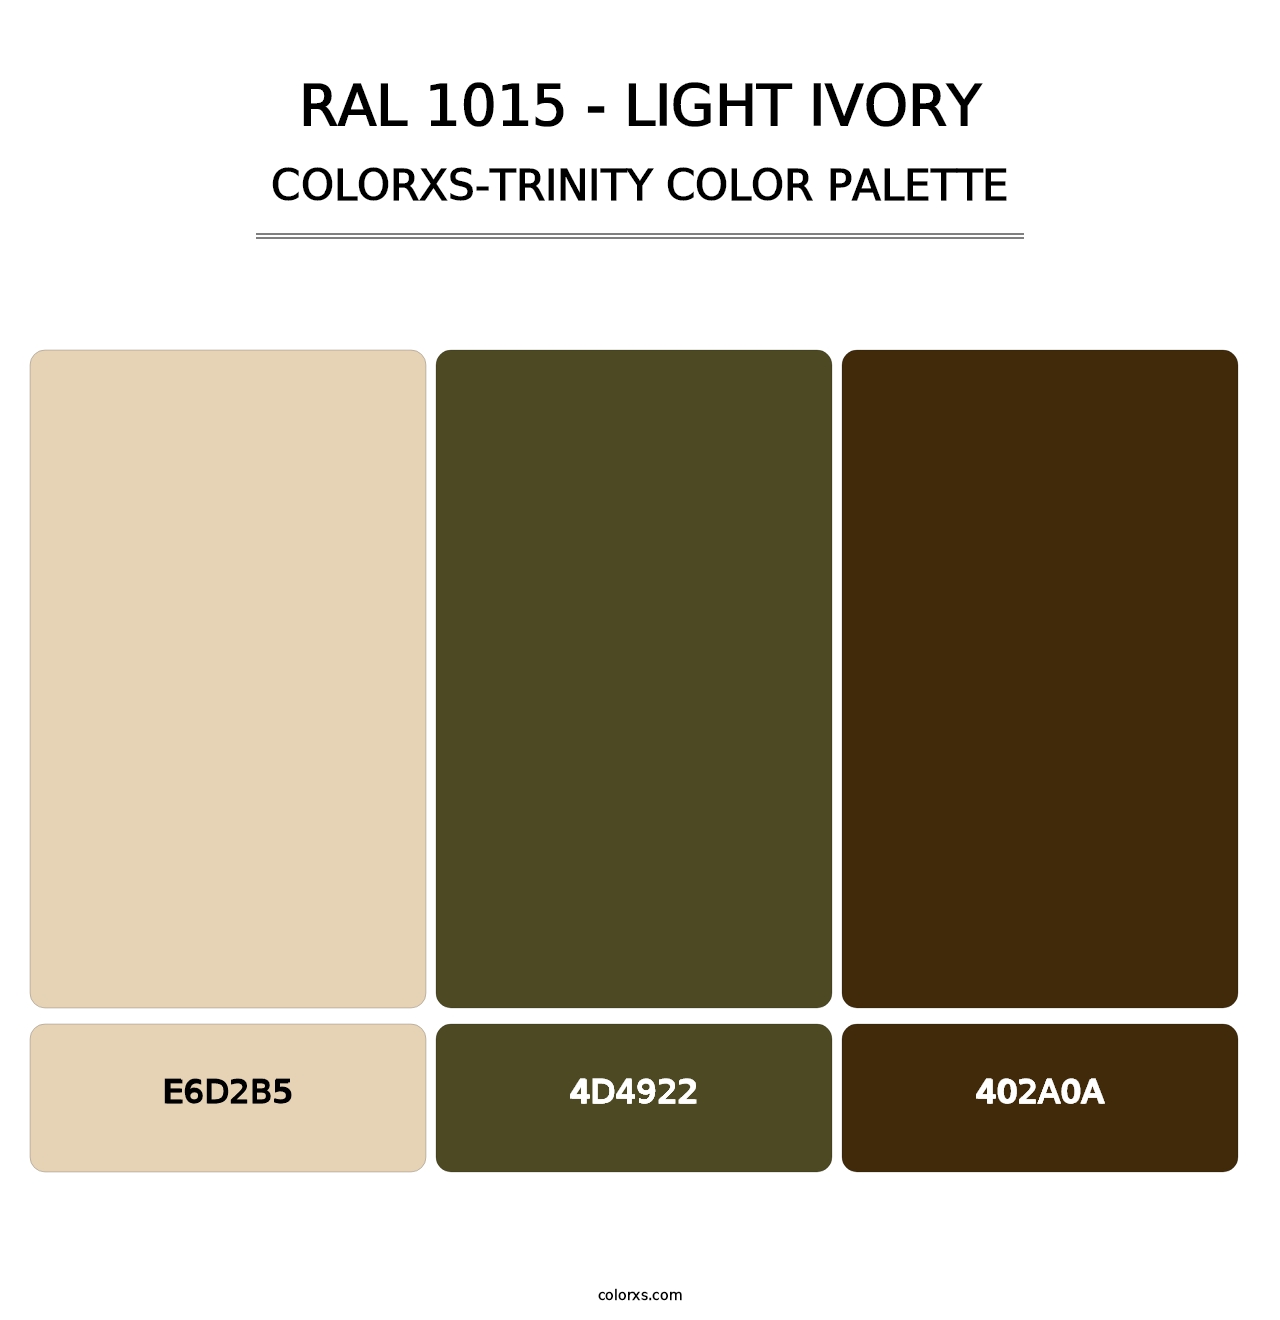 RAL 1015 - Light Ivory - Colorxs Trinity Palette